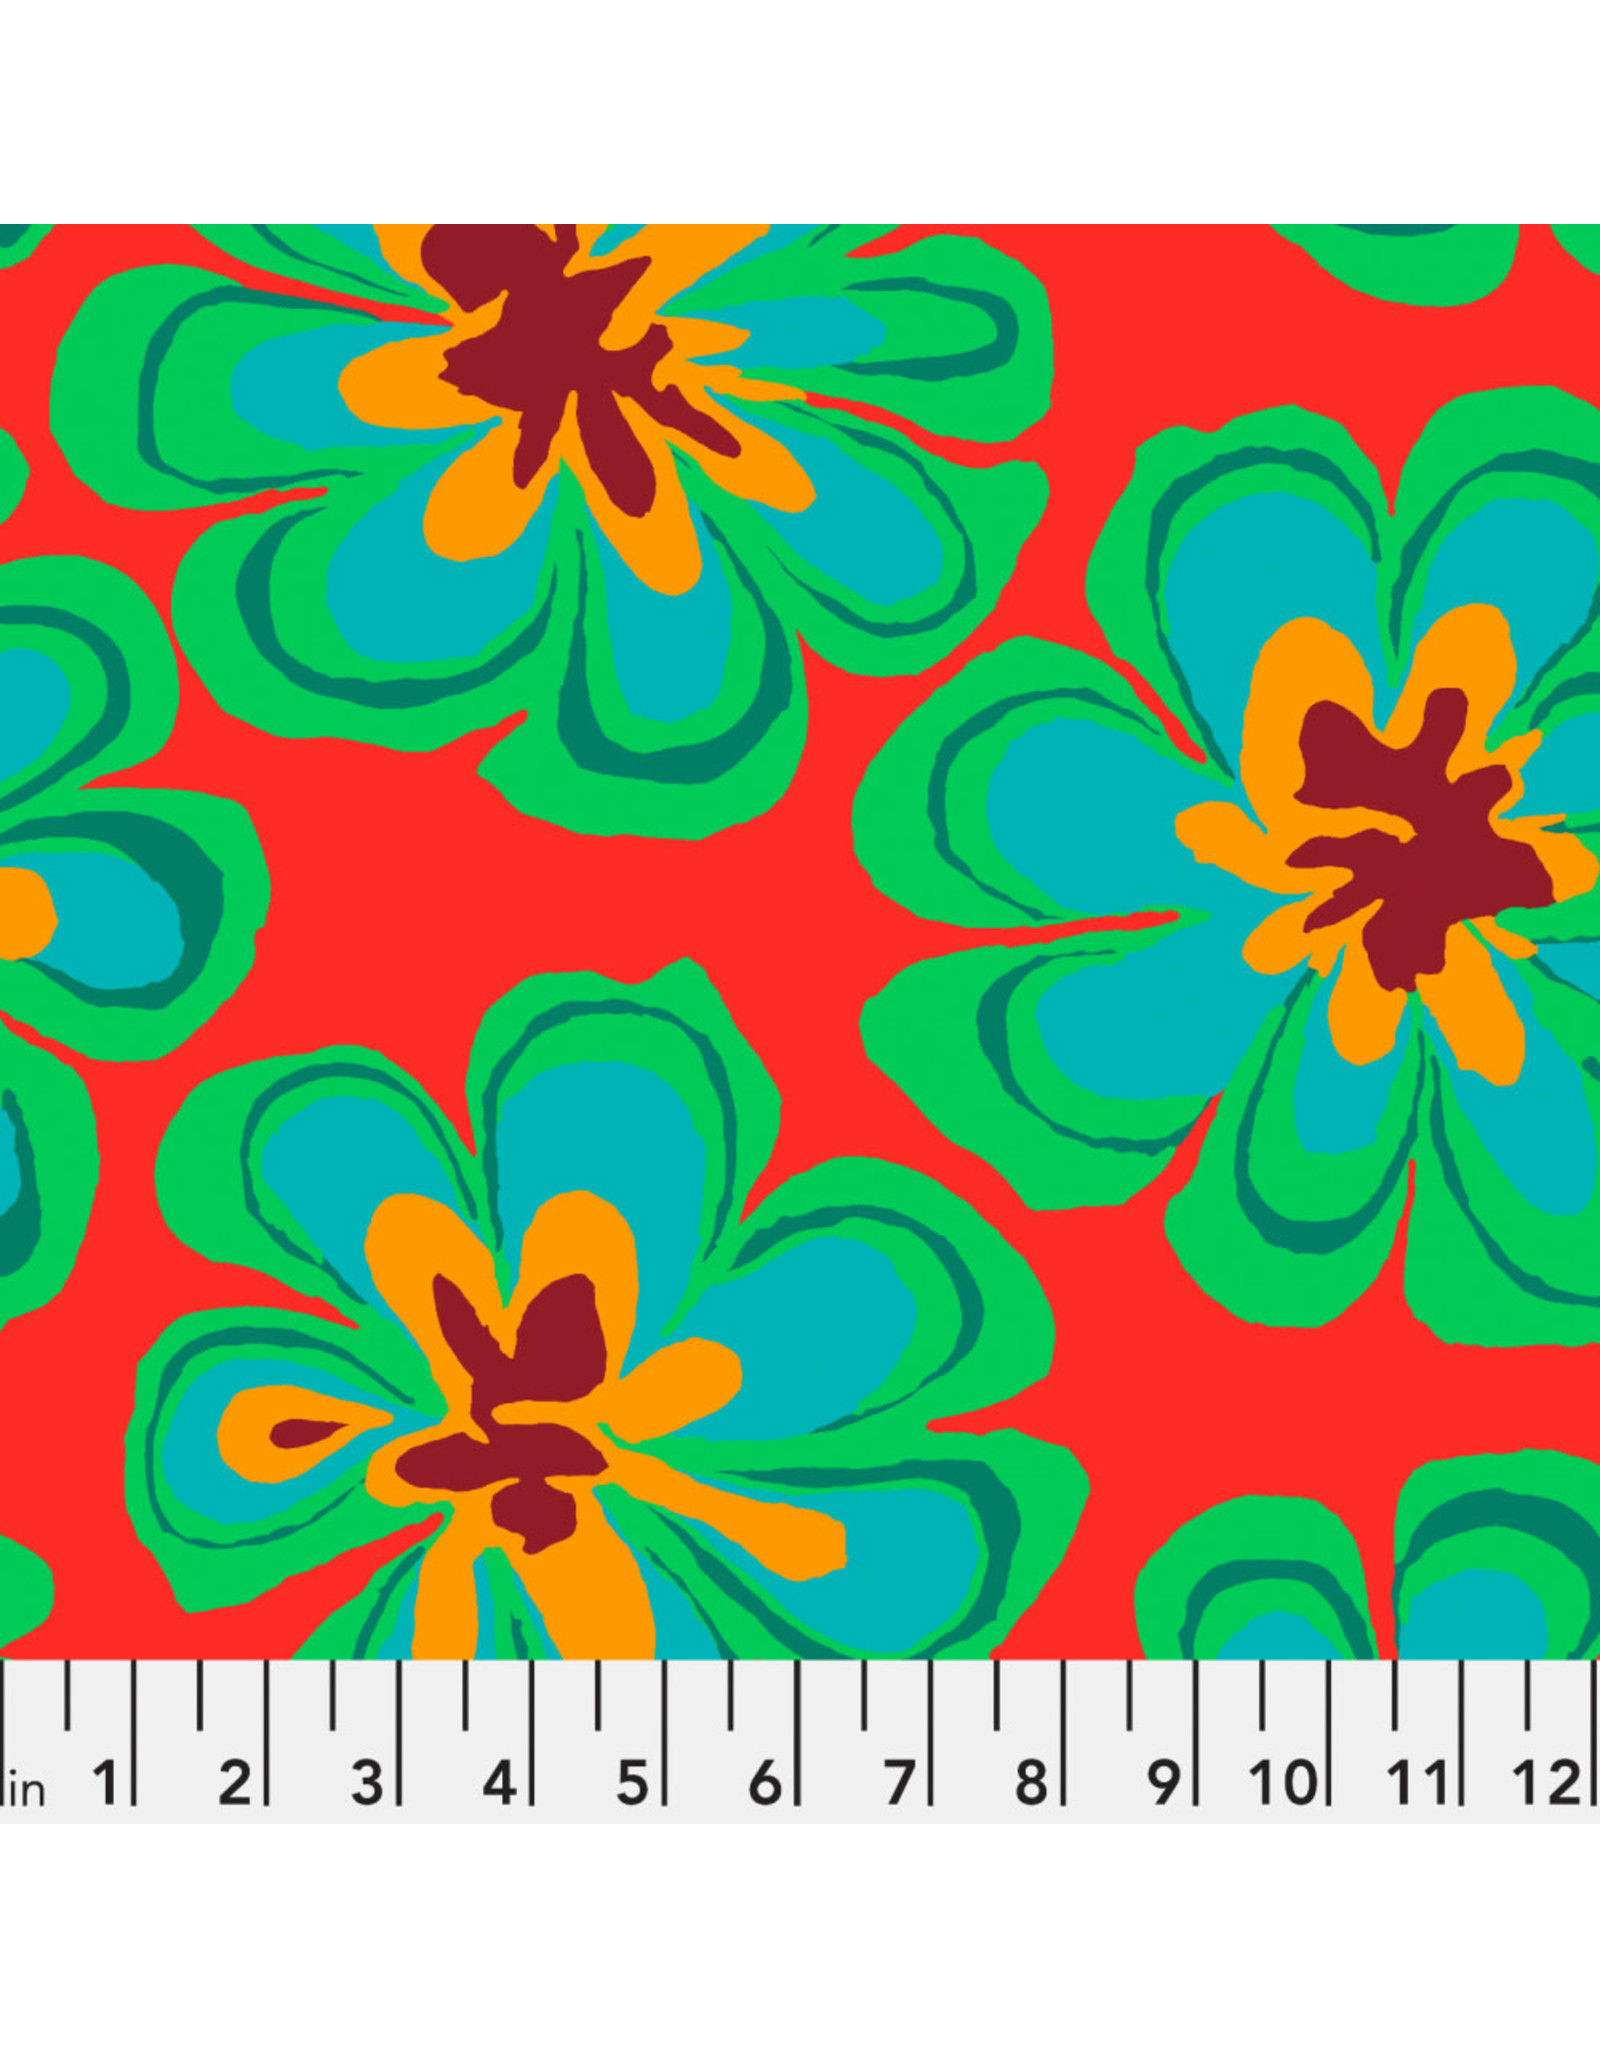 PD's Kaffe Fassett Collection Kaffe Collective, Funky Floral in Watermelon, Dinner Napkin